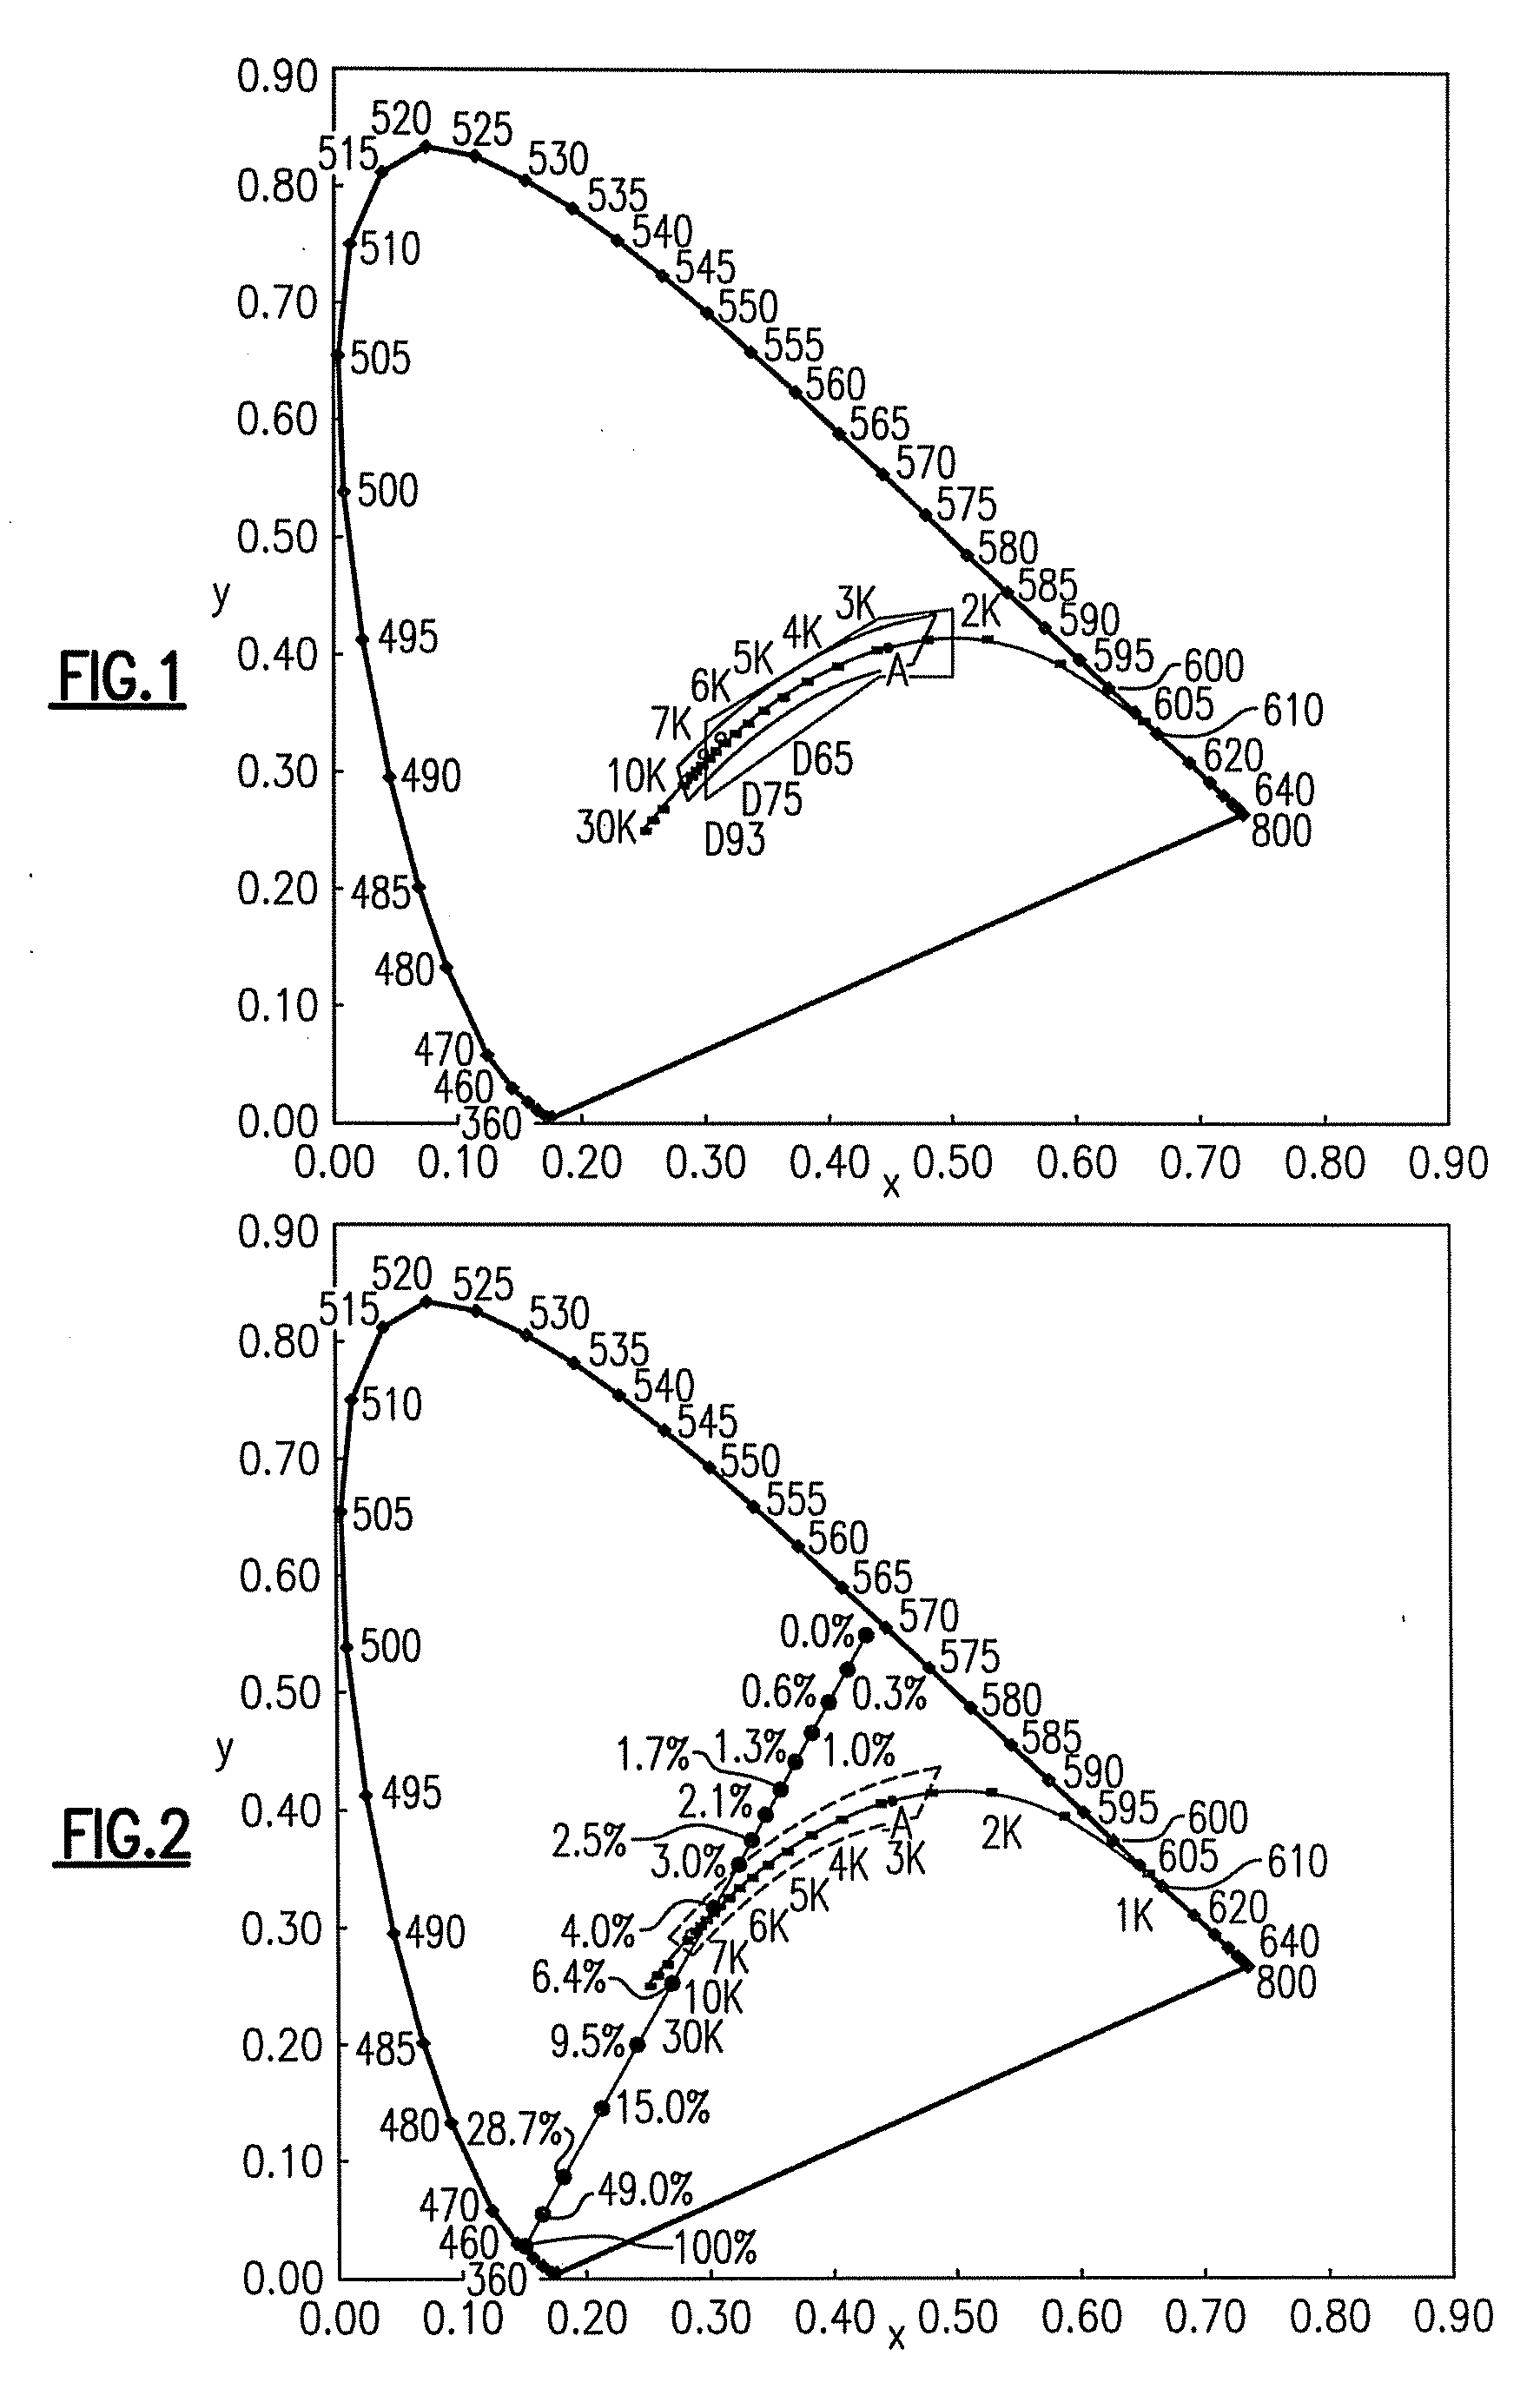 Lighting device and method of making